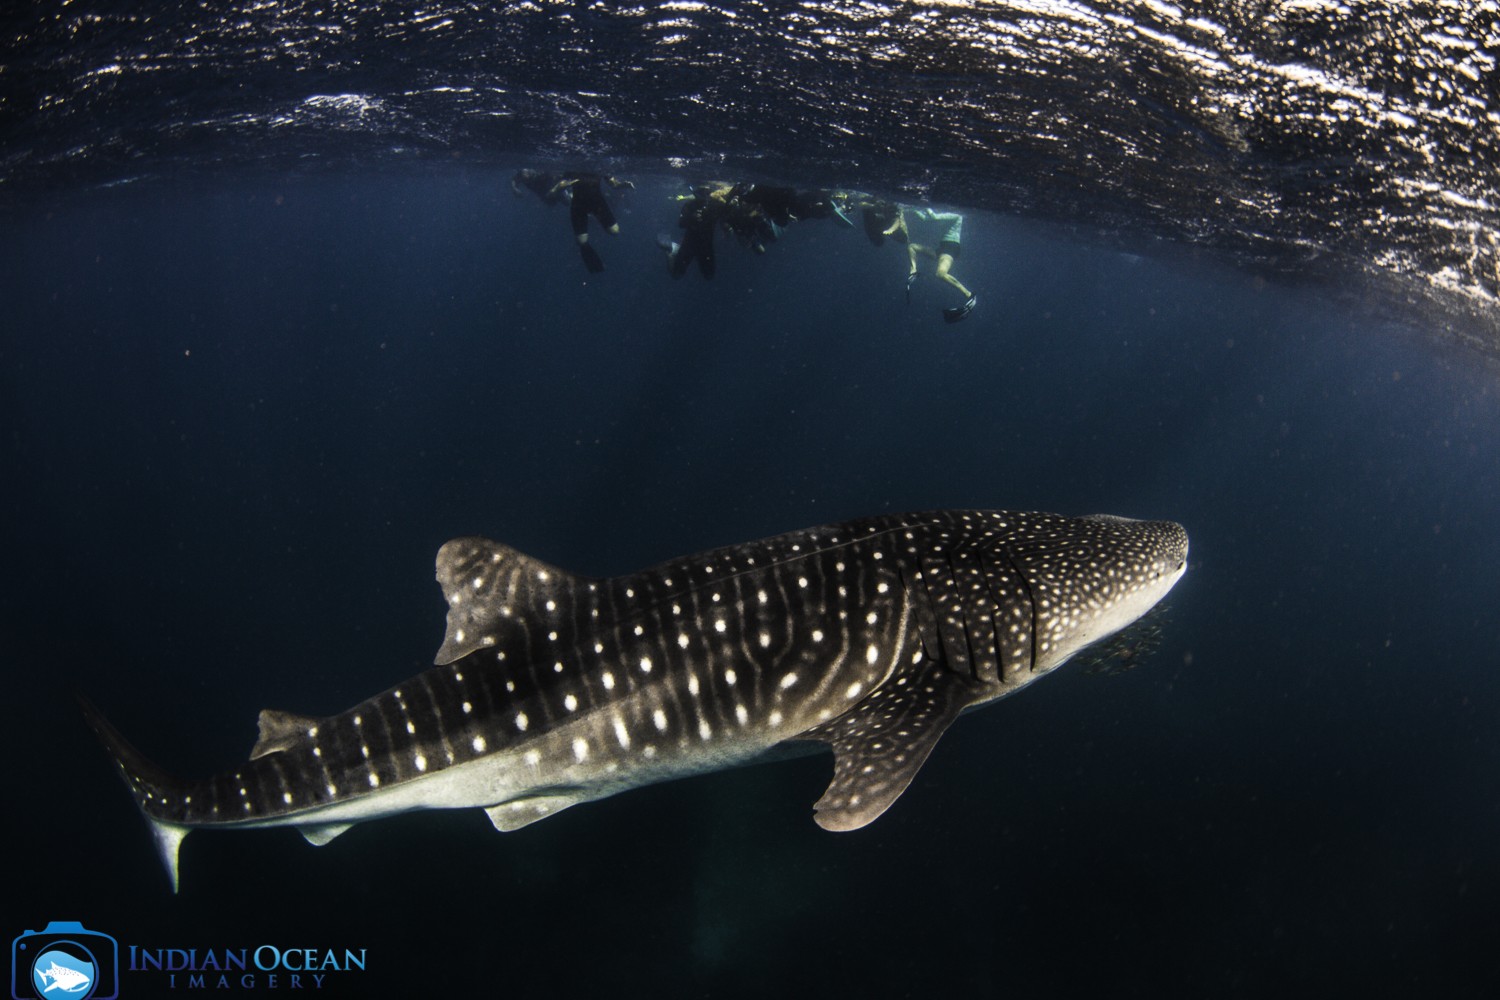 Photo by Indian Ocean Imagery courtesy of Kings Ningaloo Reef Tour